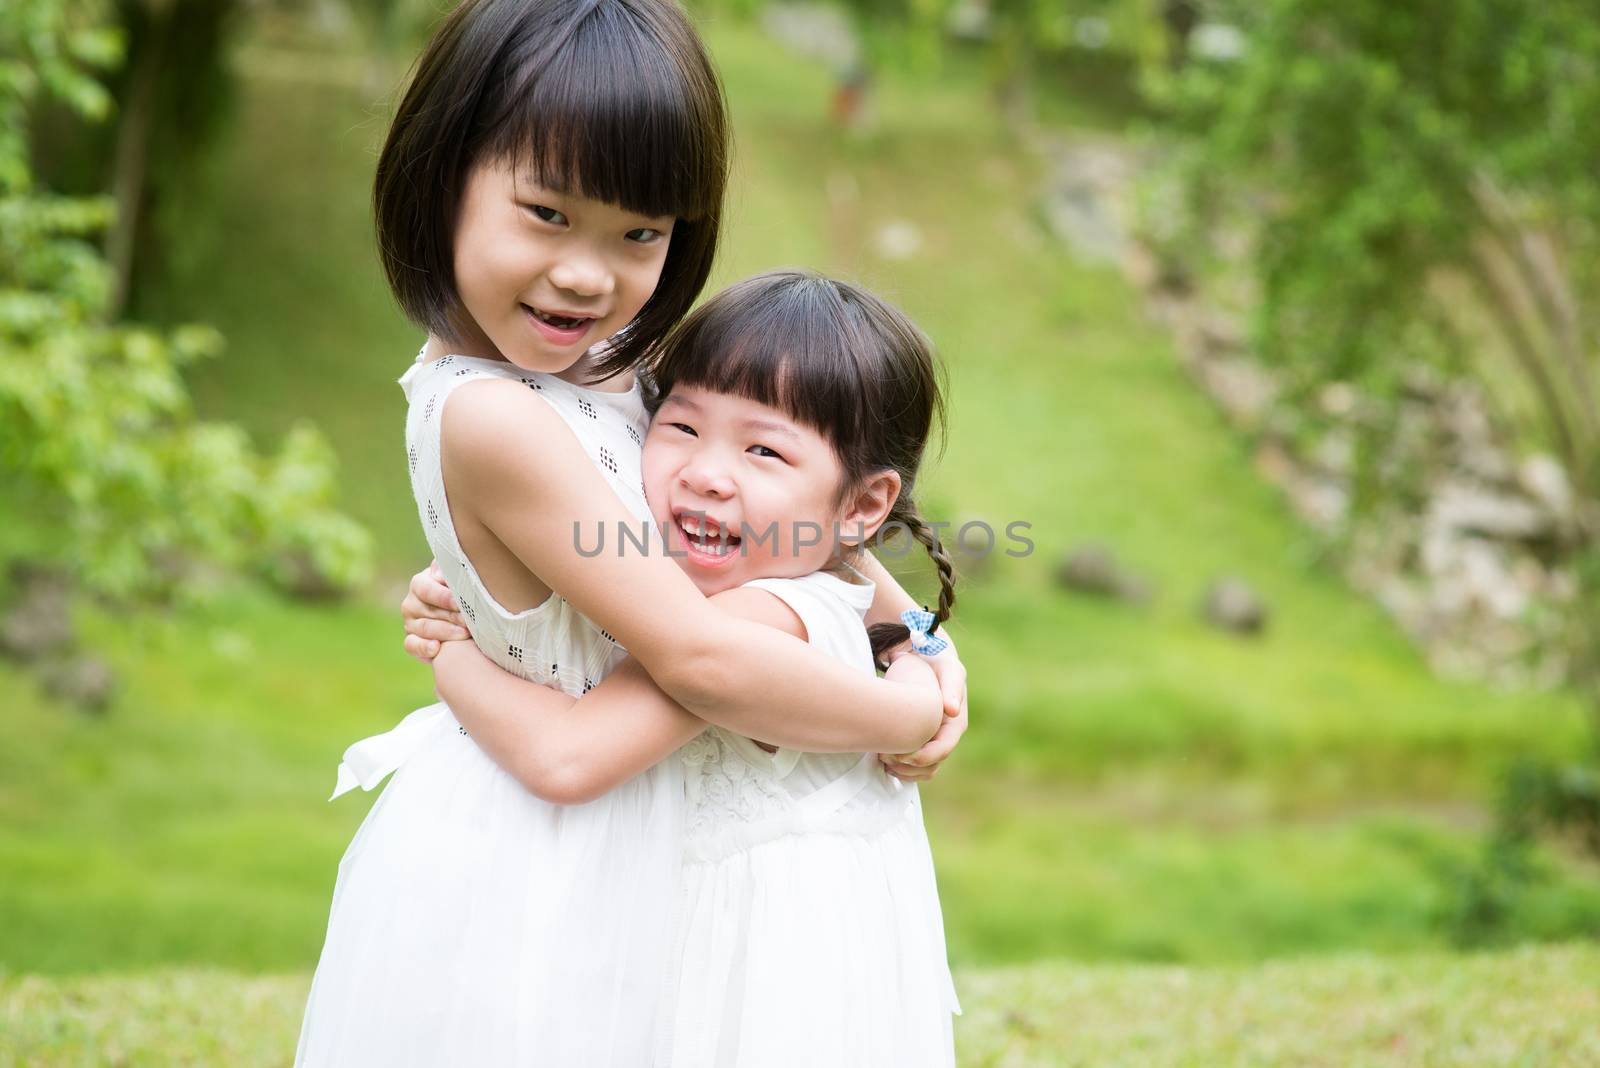 Cute sisters playing and hugging at garden park. Asian family outdoors portrait.